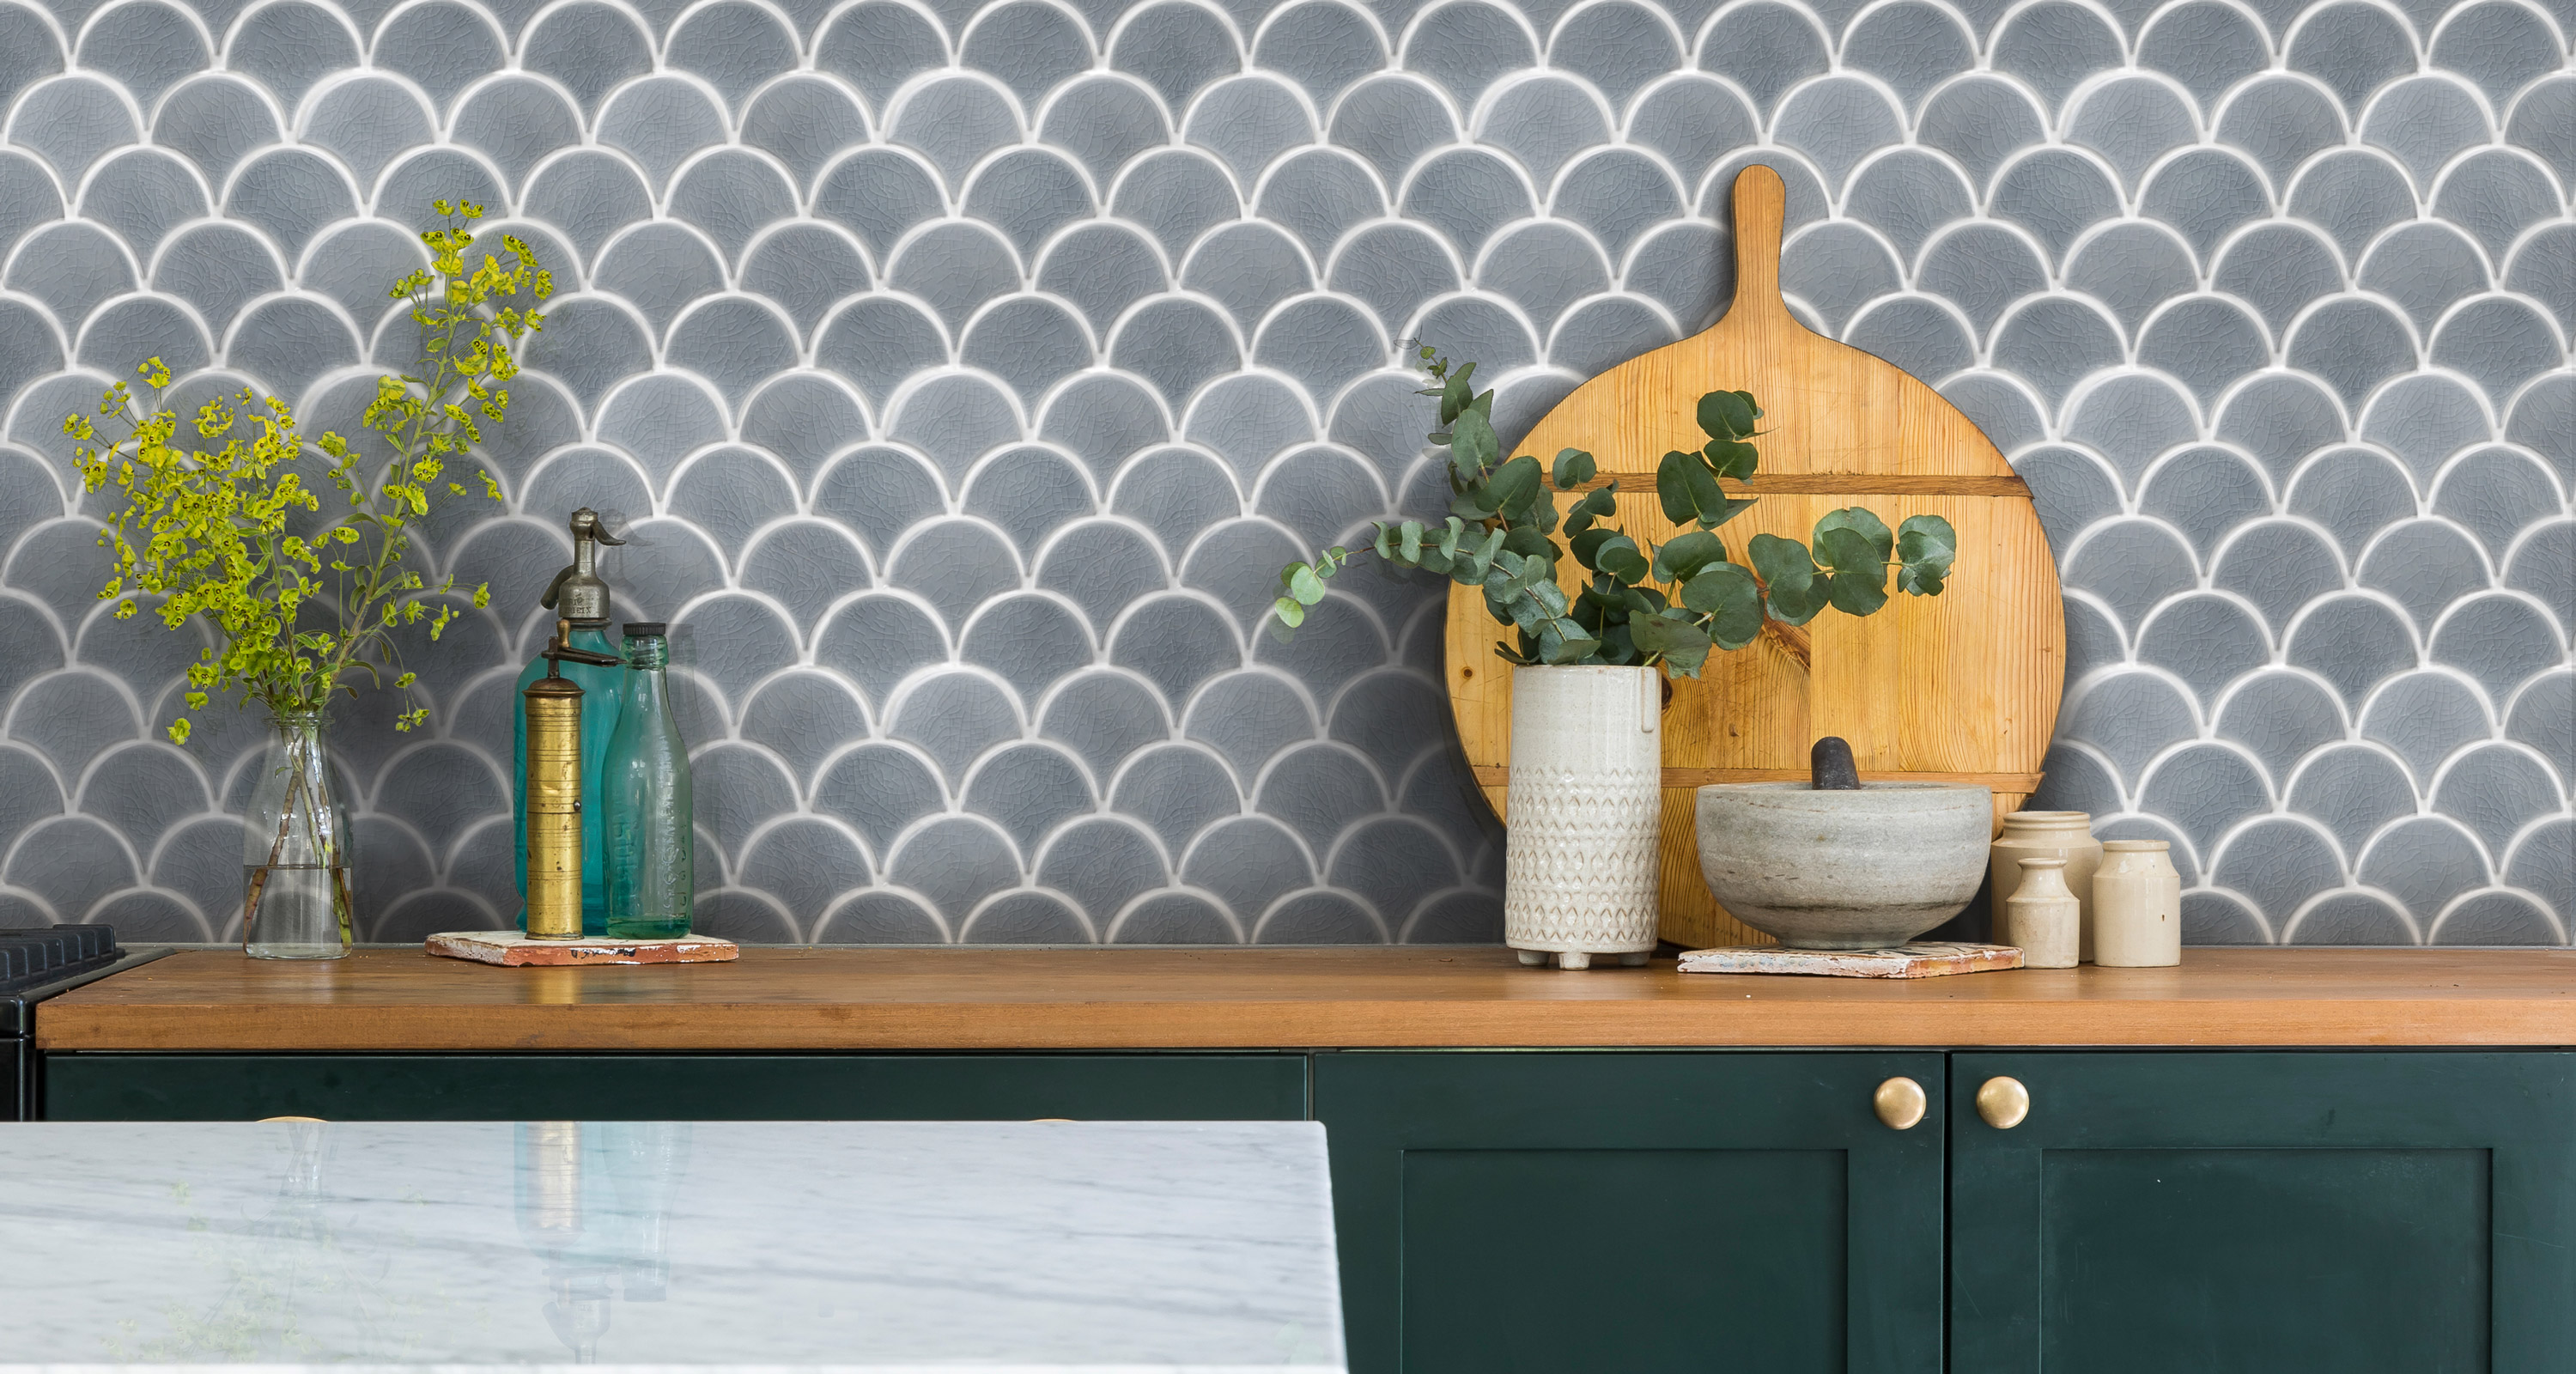 Kitchen wall tile ideas bring color, pattern and style to ...